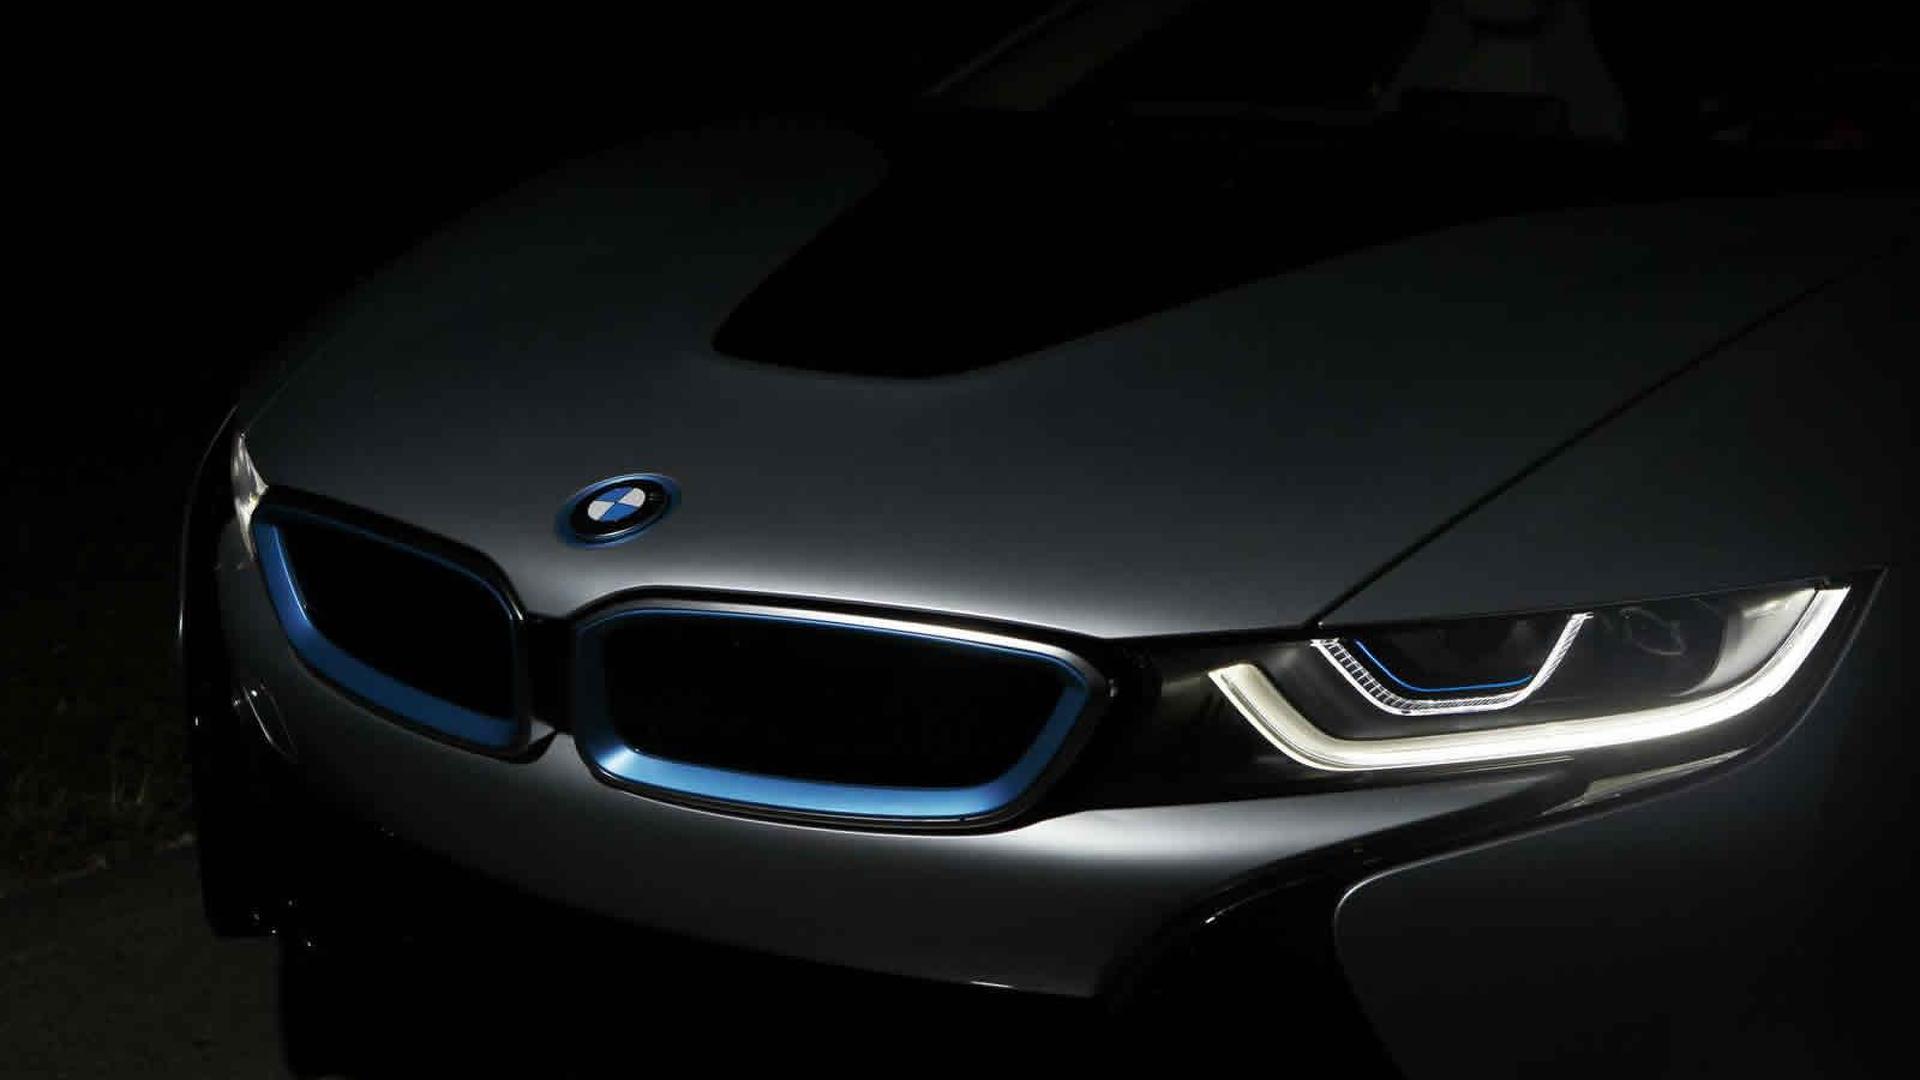 BMW announces laser headlights will be available this fall on the i8